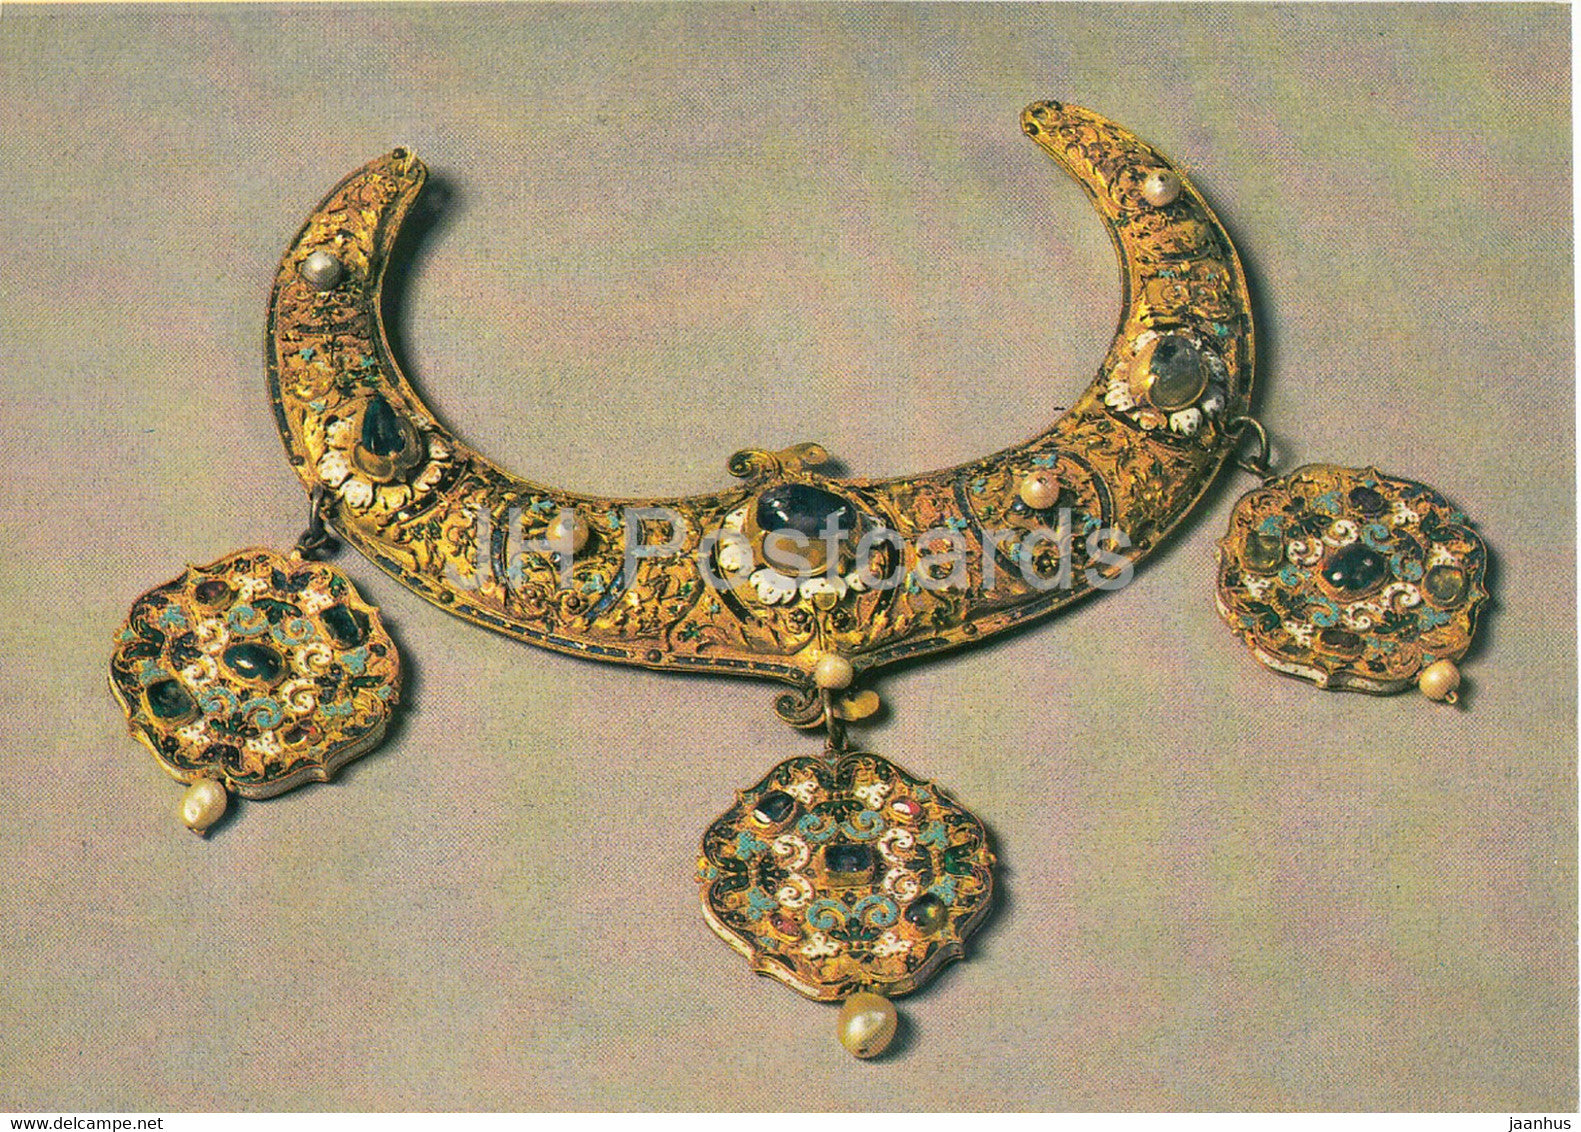 Gold and Silverwork in old Russia - Crescent, 16th century - 1983 - Russia - USSR - used - JH Postcards